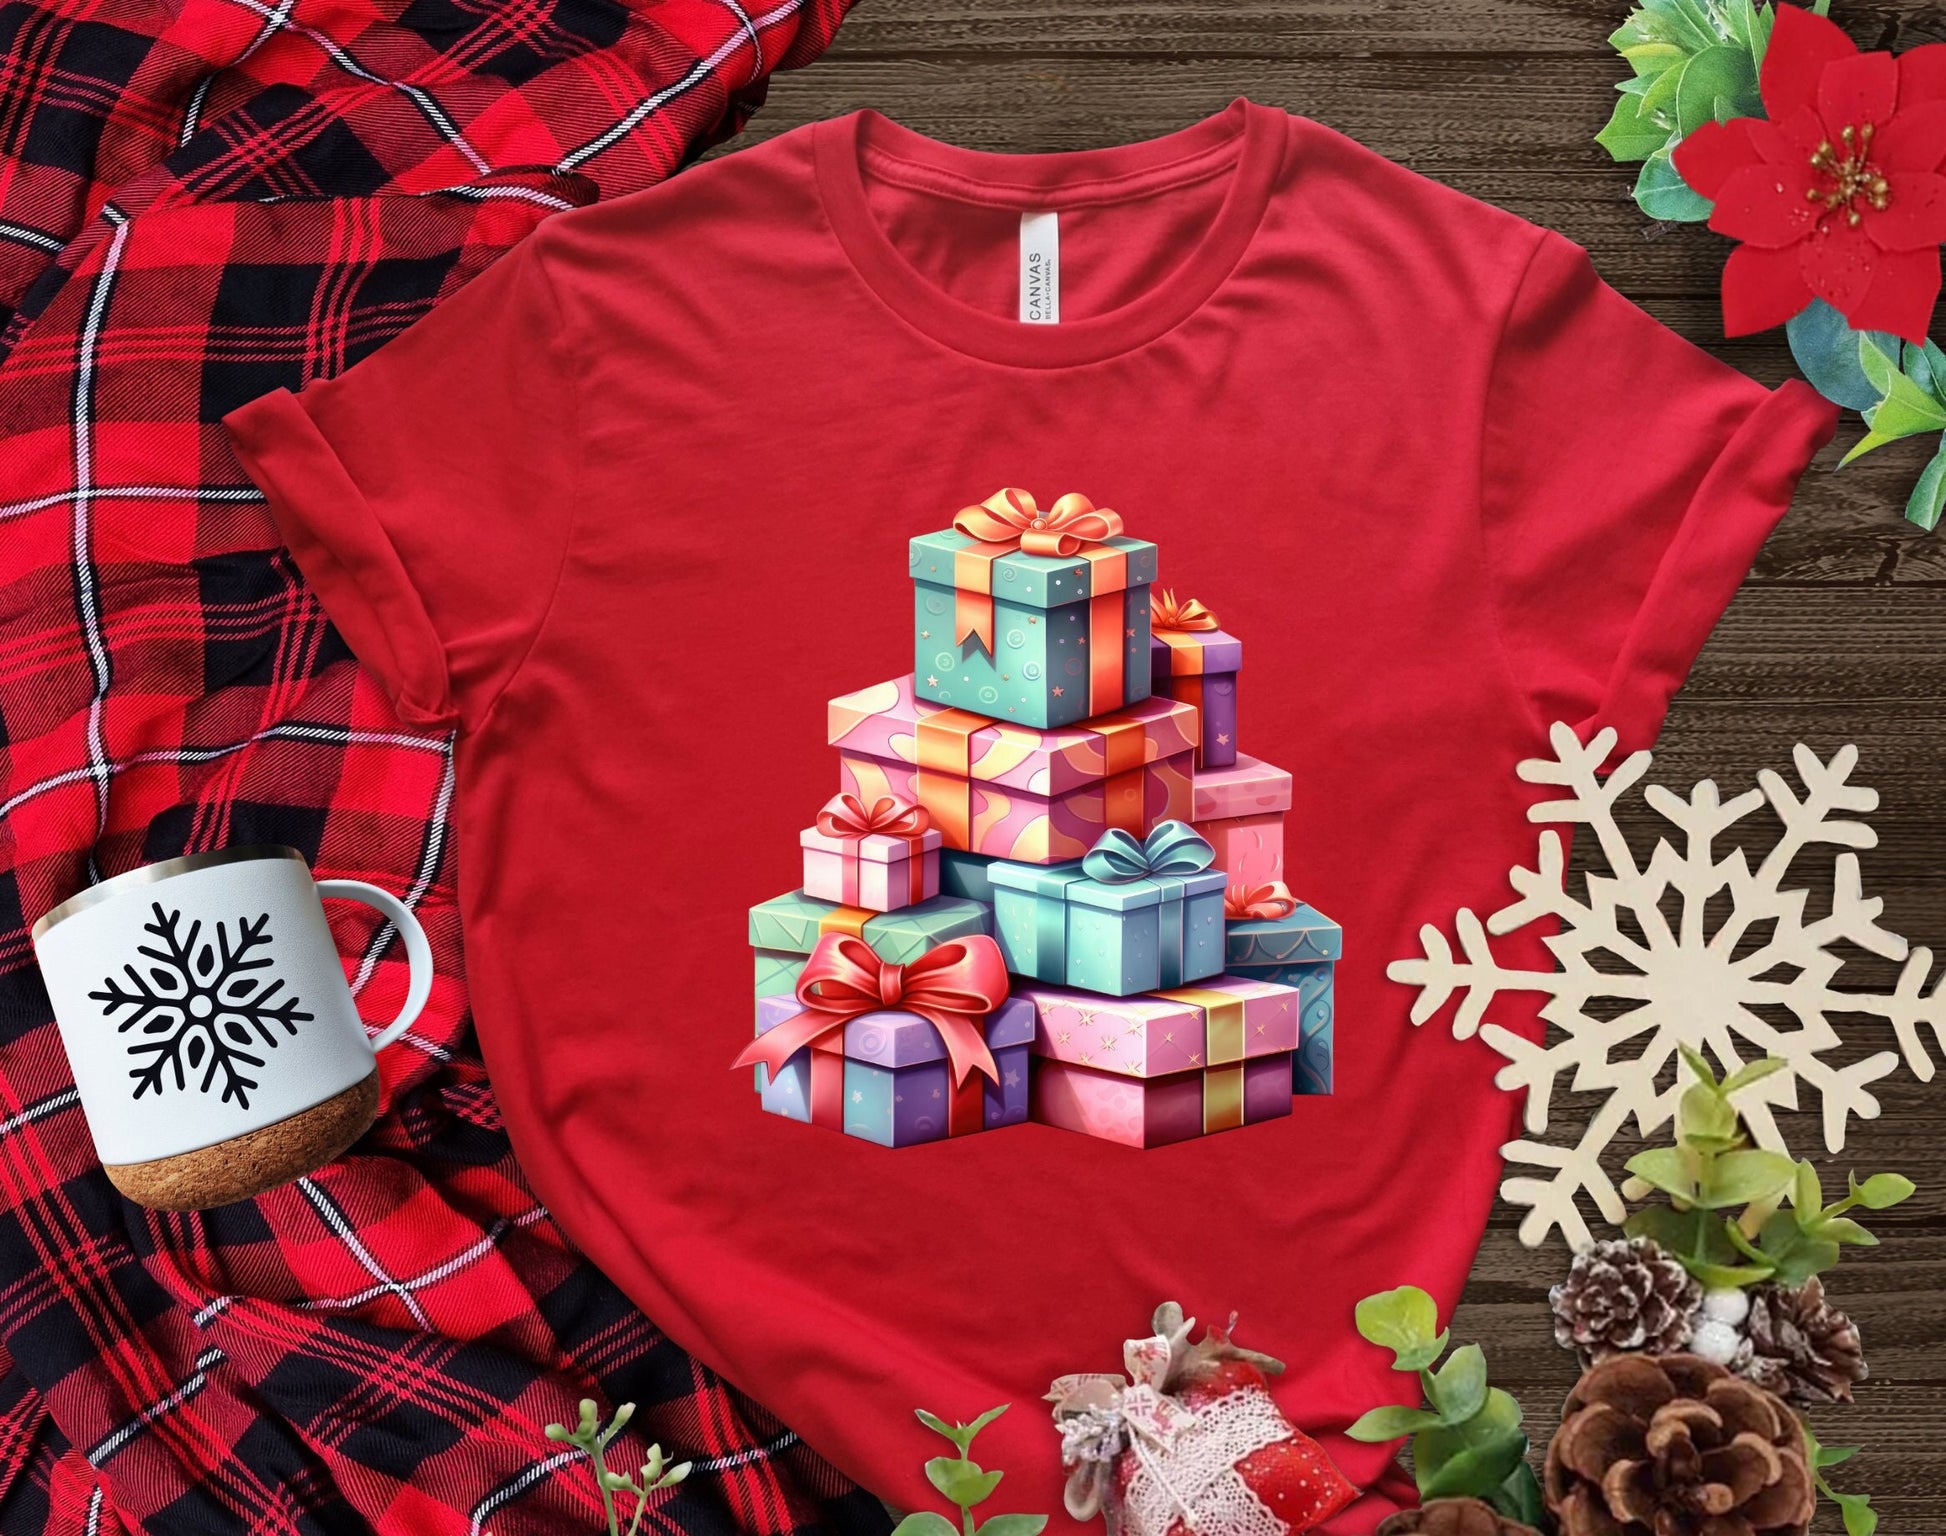 The Tower of Presents Christmas Shirt Makes the Perfect Gift for Friends, Family, Coworkers or yourself.  Check Out My Shop for even more Great Designs.
www.scorpiontees.etsy.com